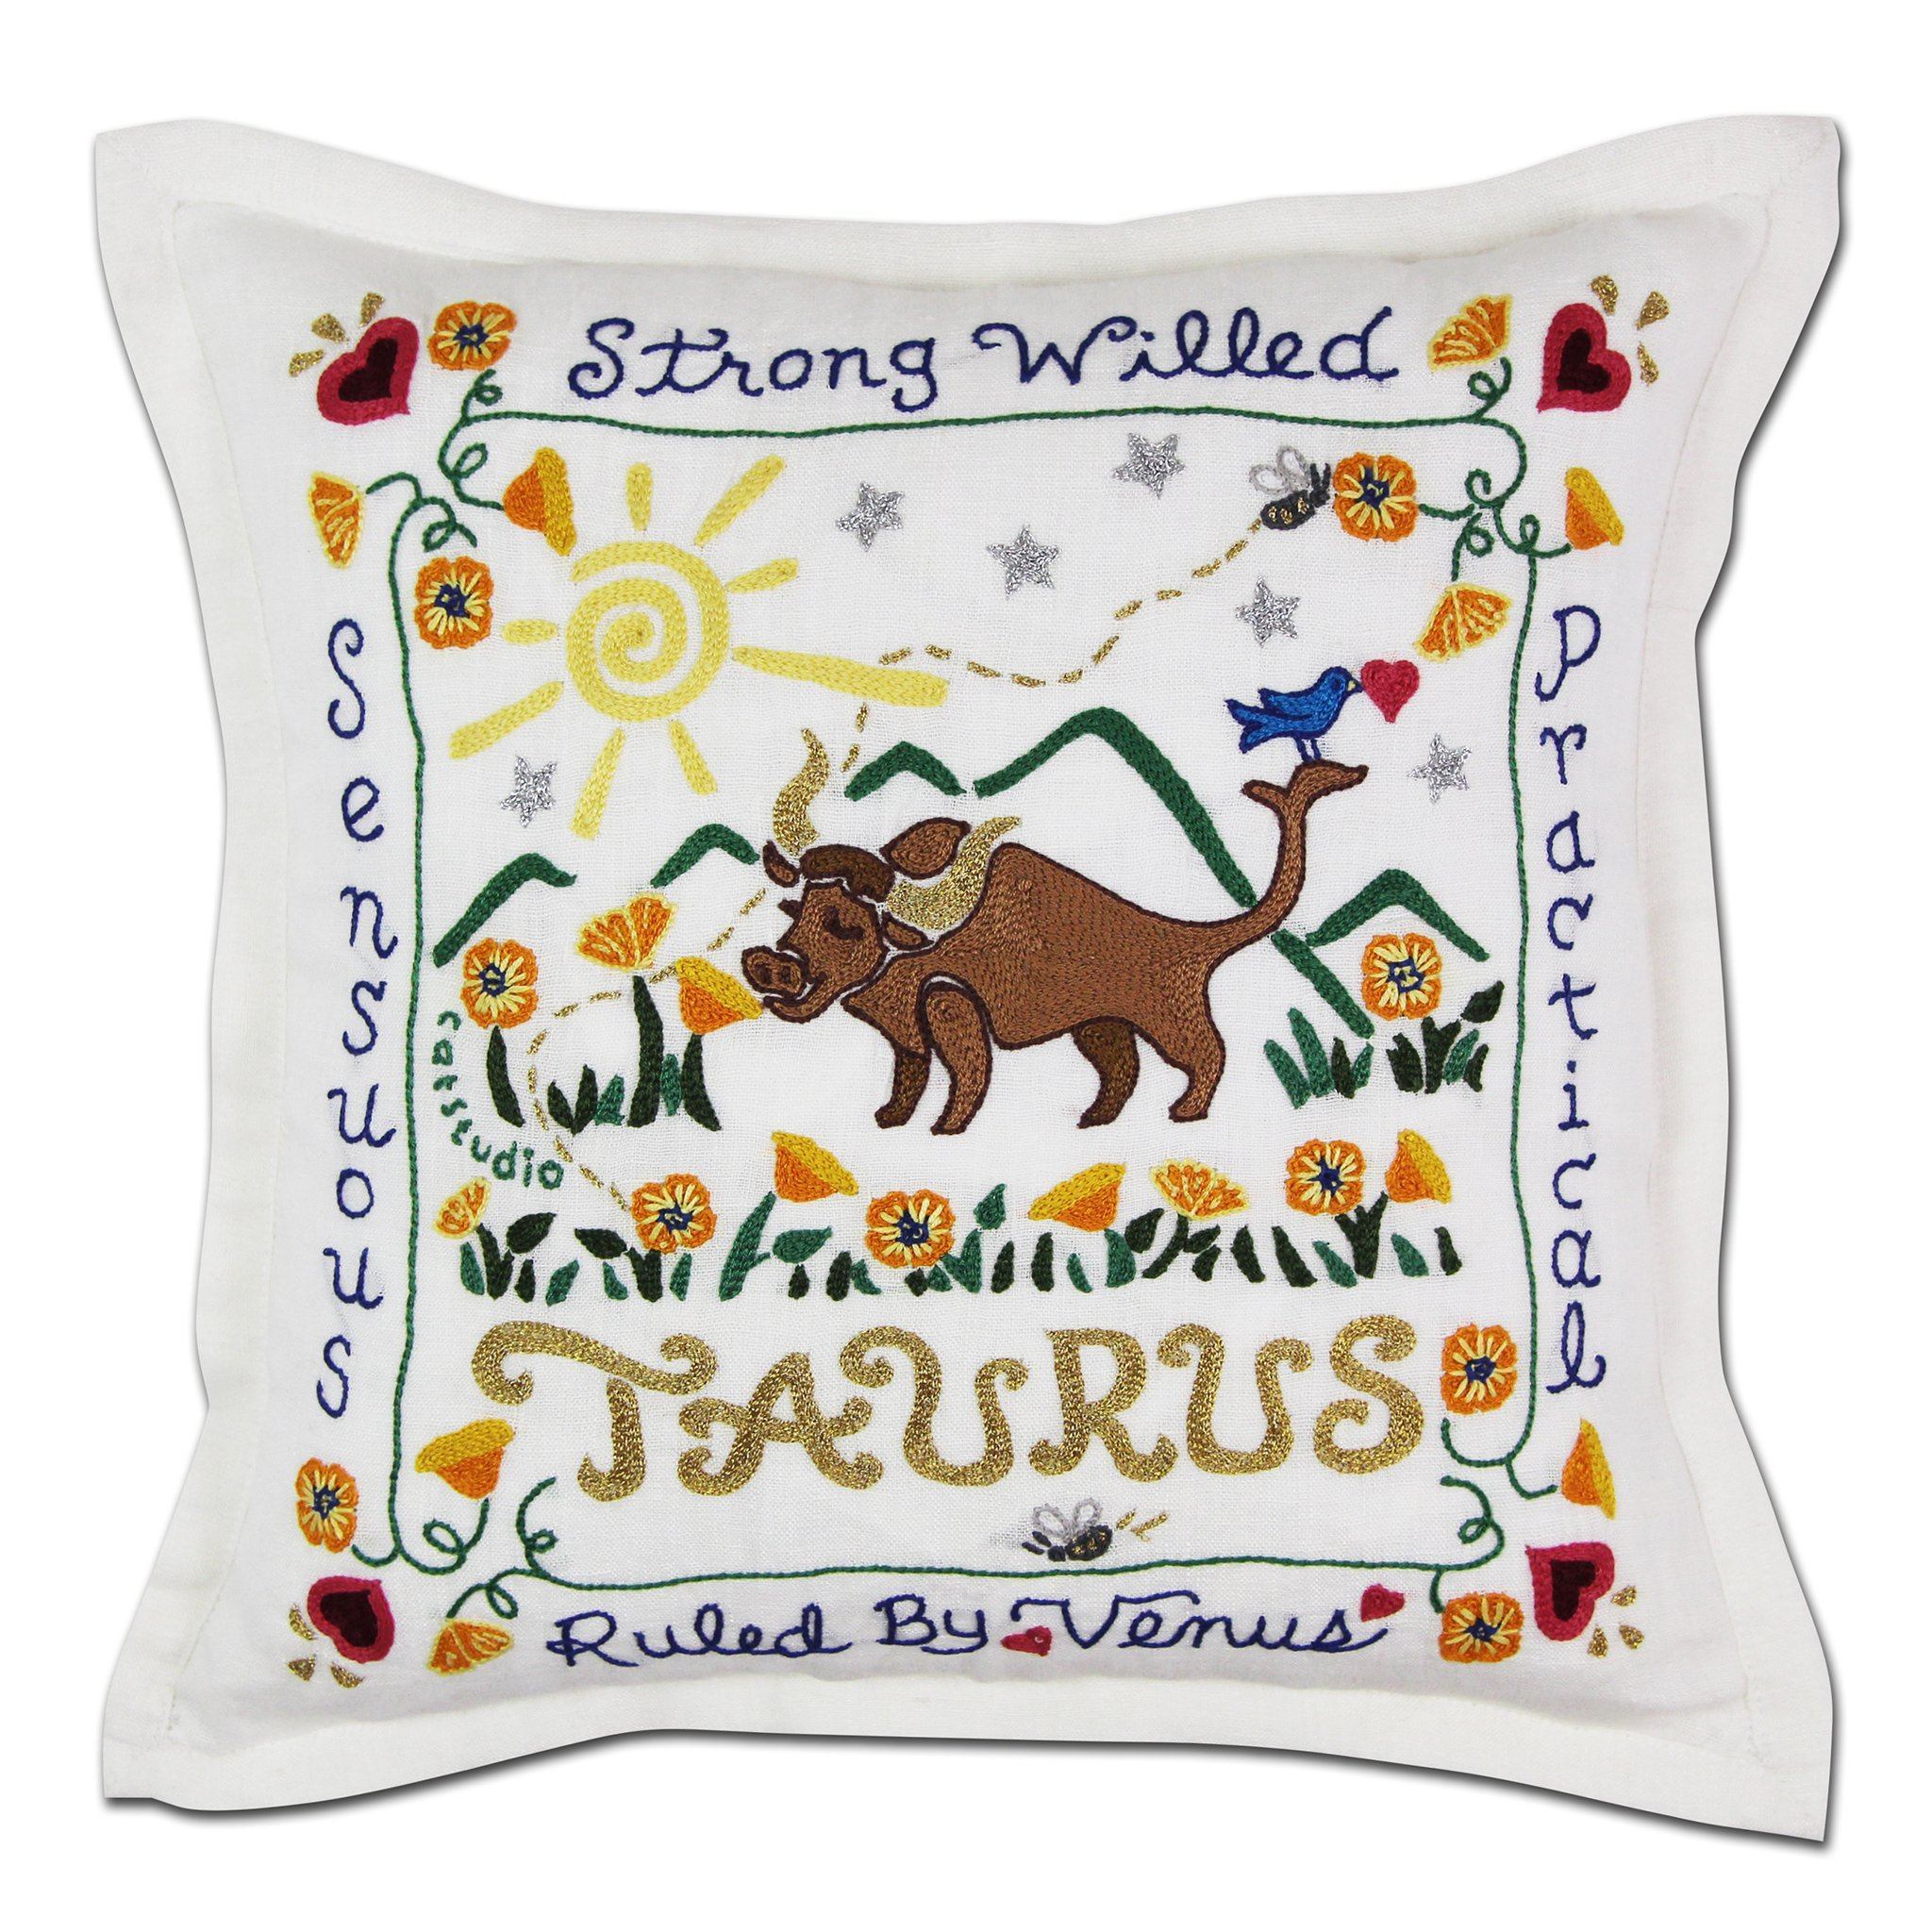 Taurus Astrology Hand-Embroidered Pillow